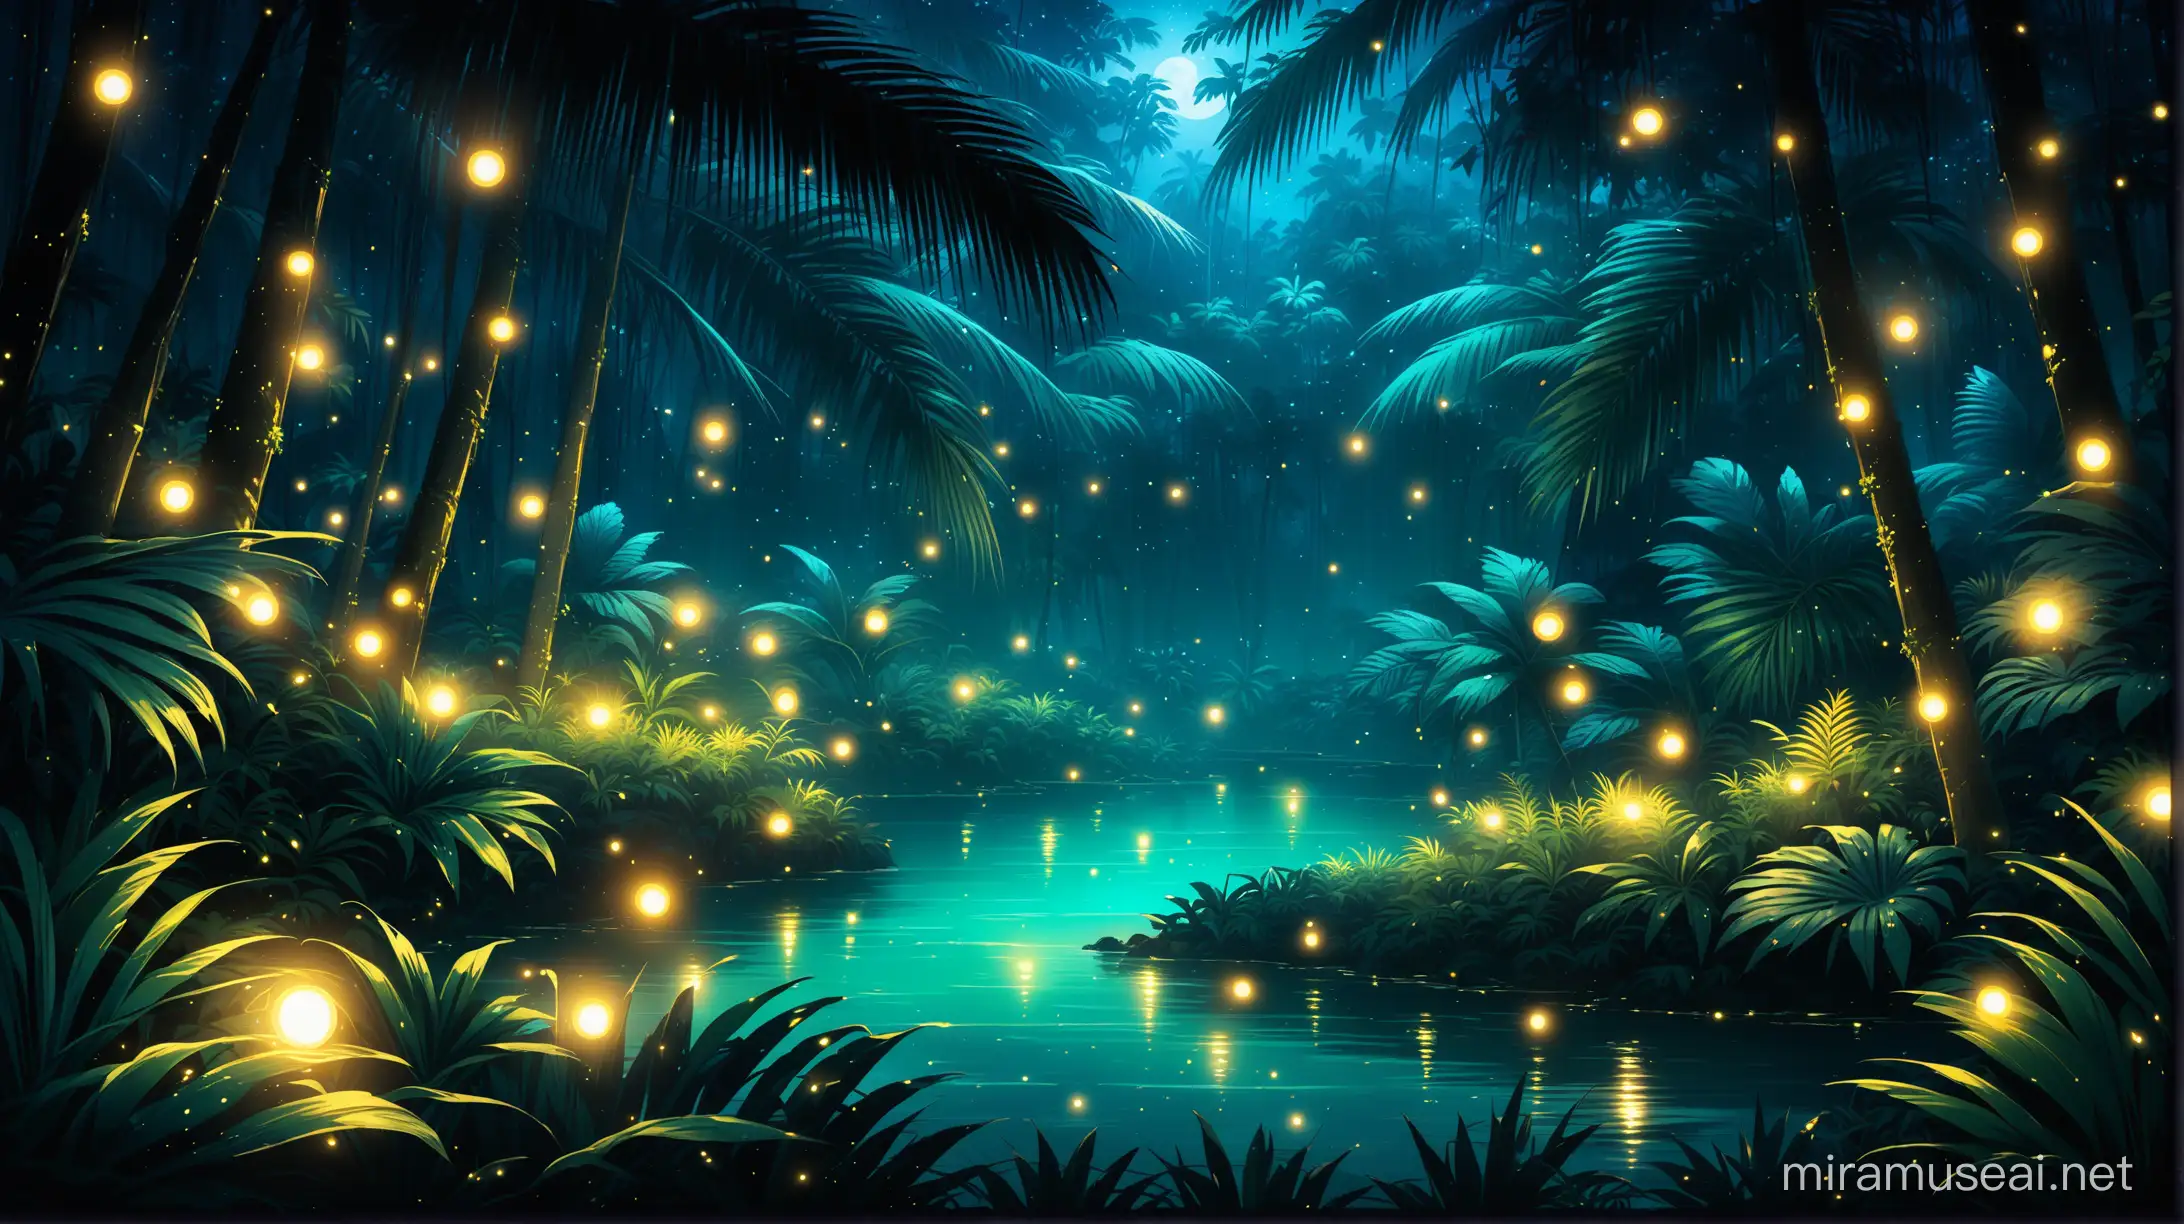 Enchanted Night in the Tropical Jungle with Glowing Fireflies